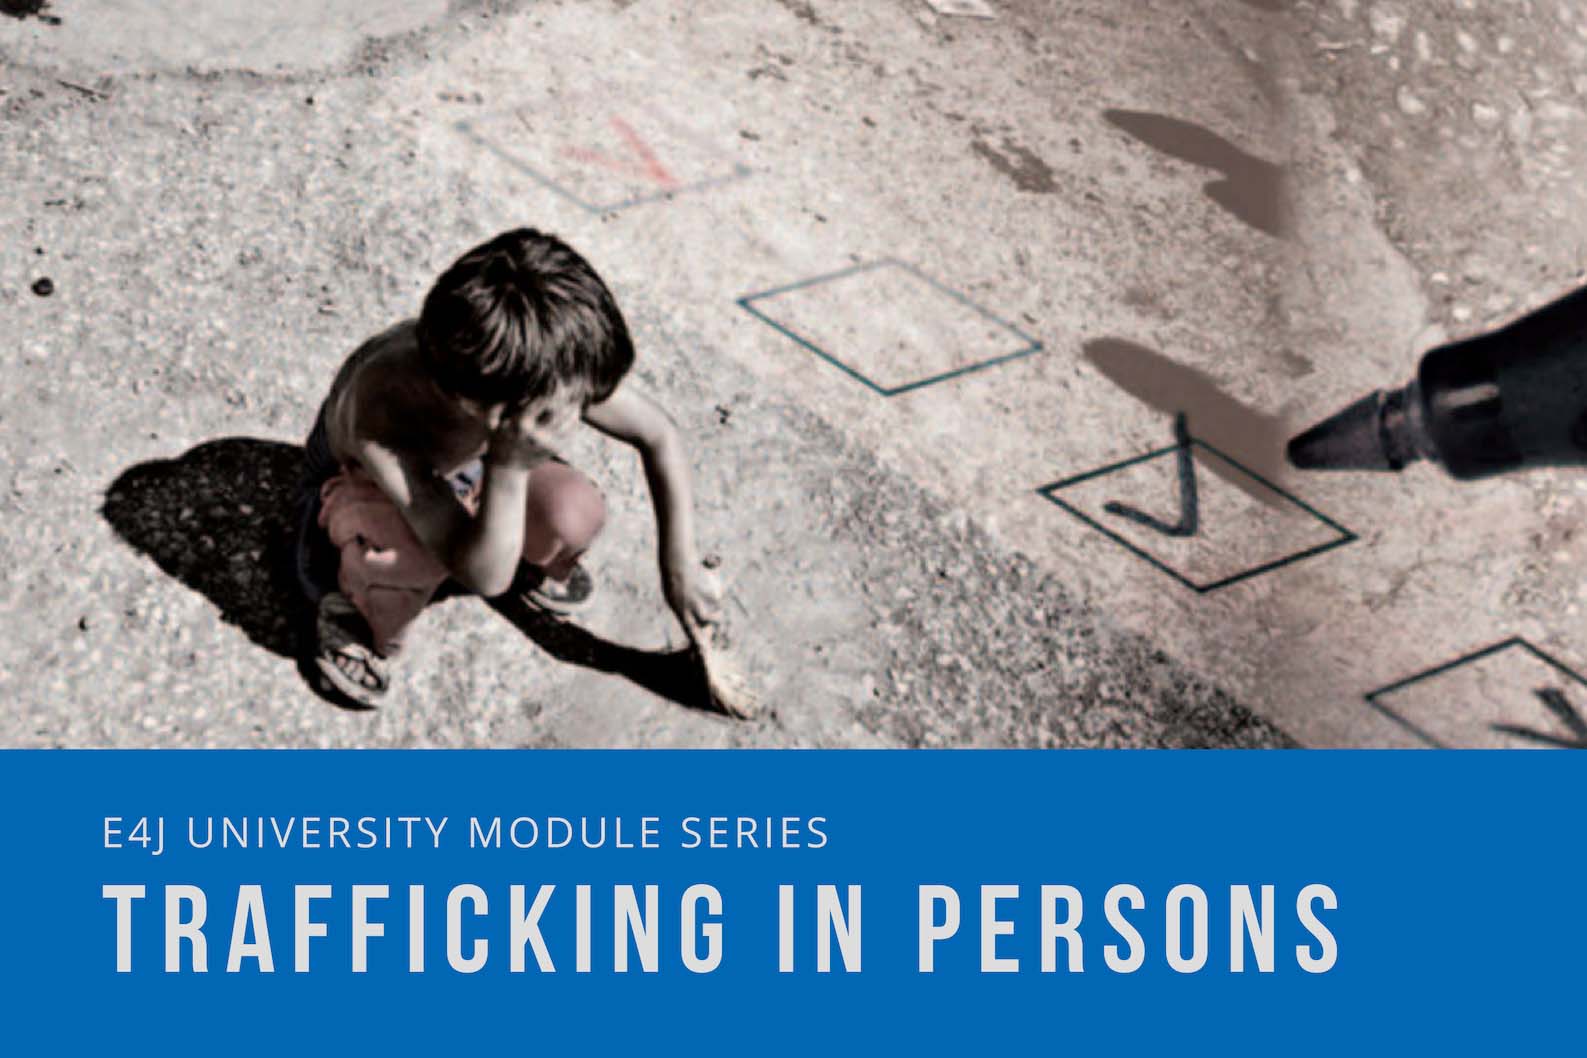 New UNODC university modules to teach about Trafficking in Persons, a crime that violates fundamental human rights